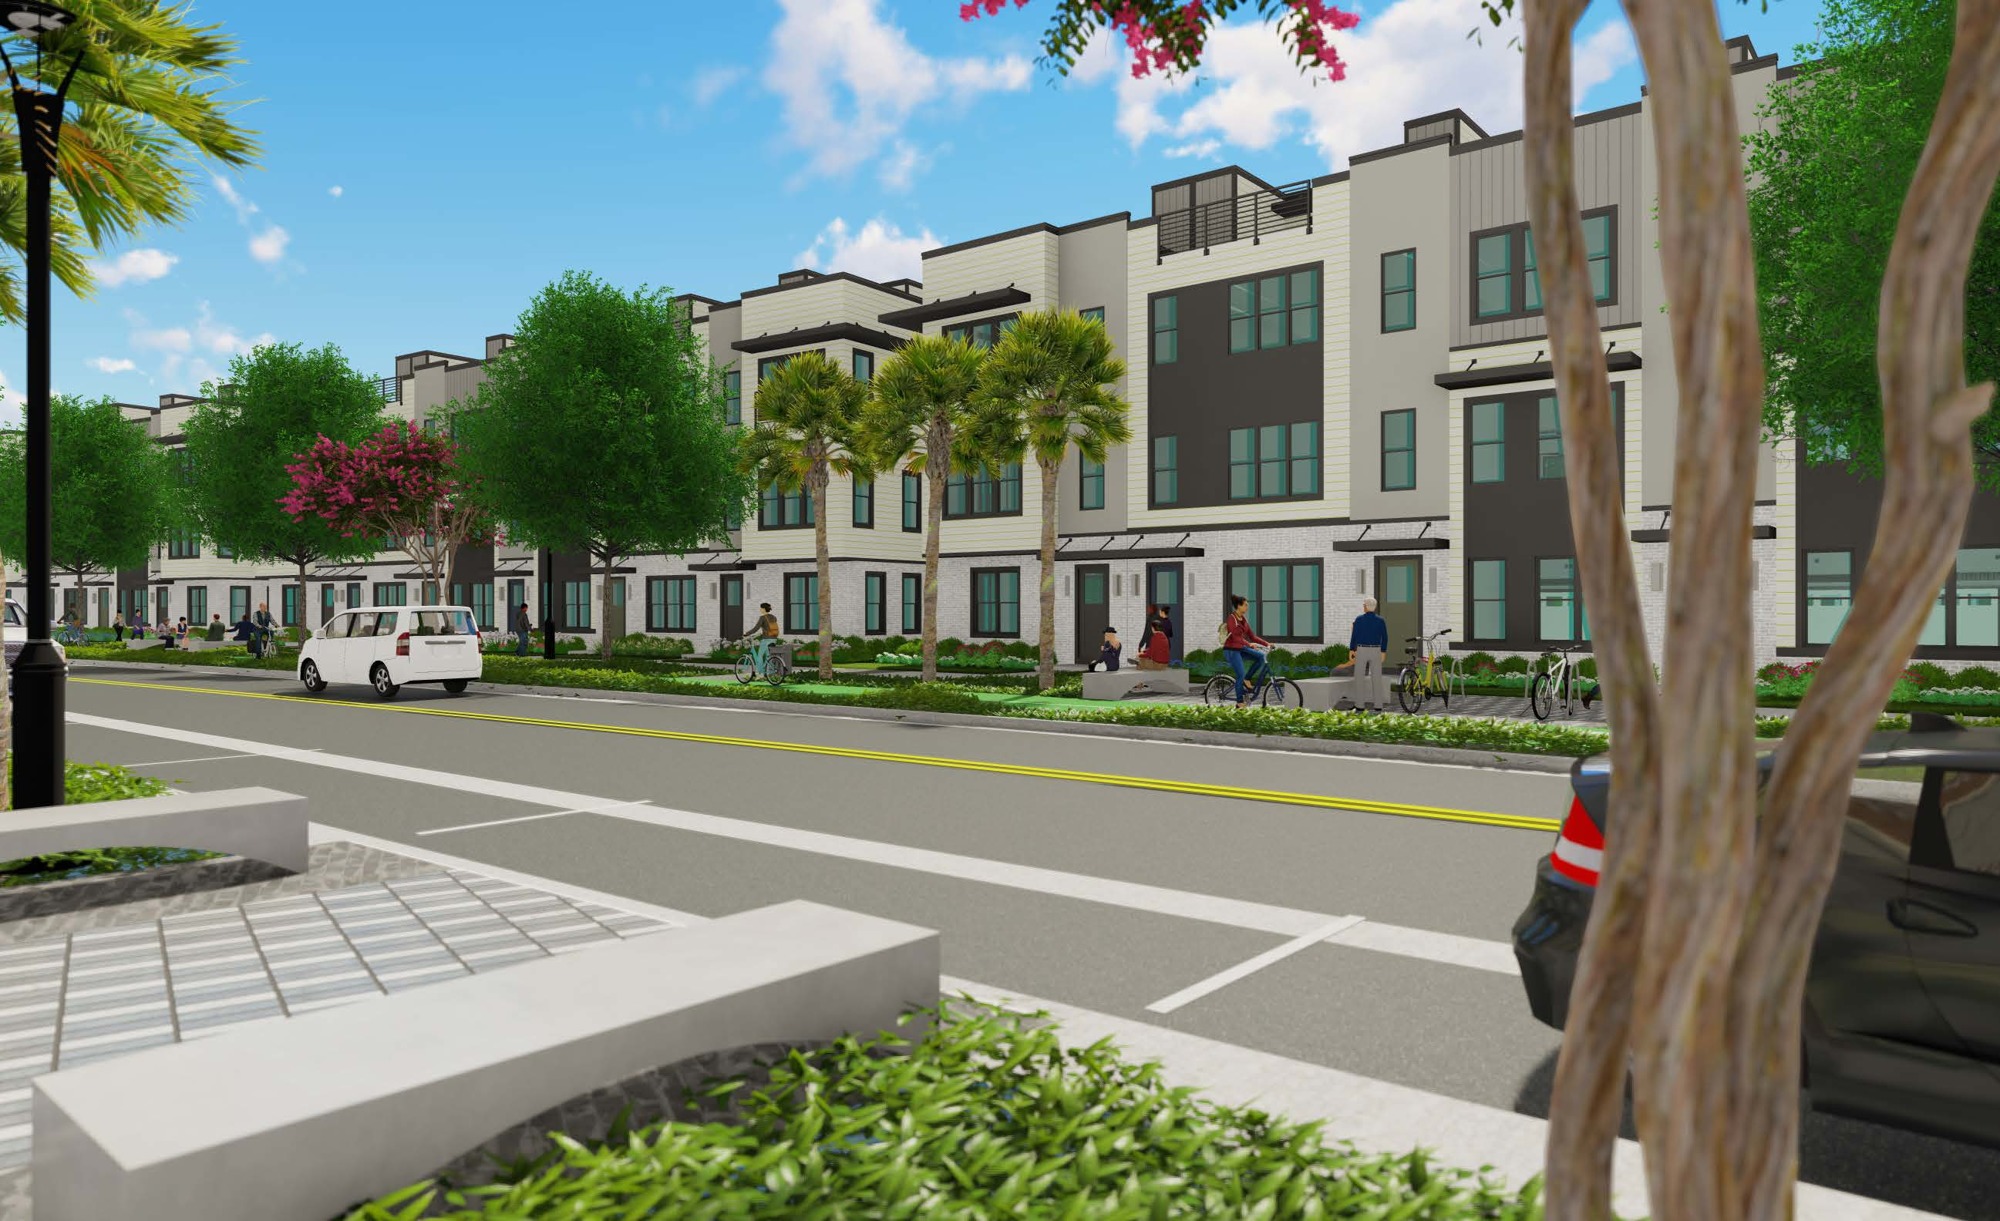 Toll Bros. plans 39 for-sale town houses at RiversEdge, formerly called The District.